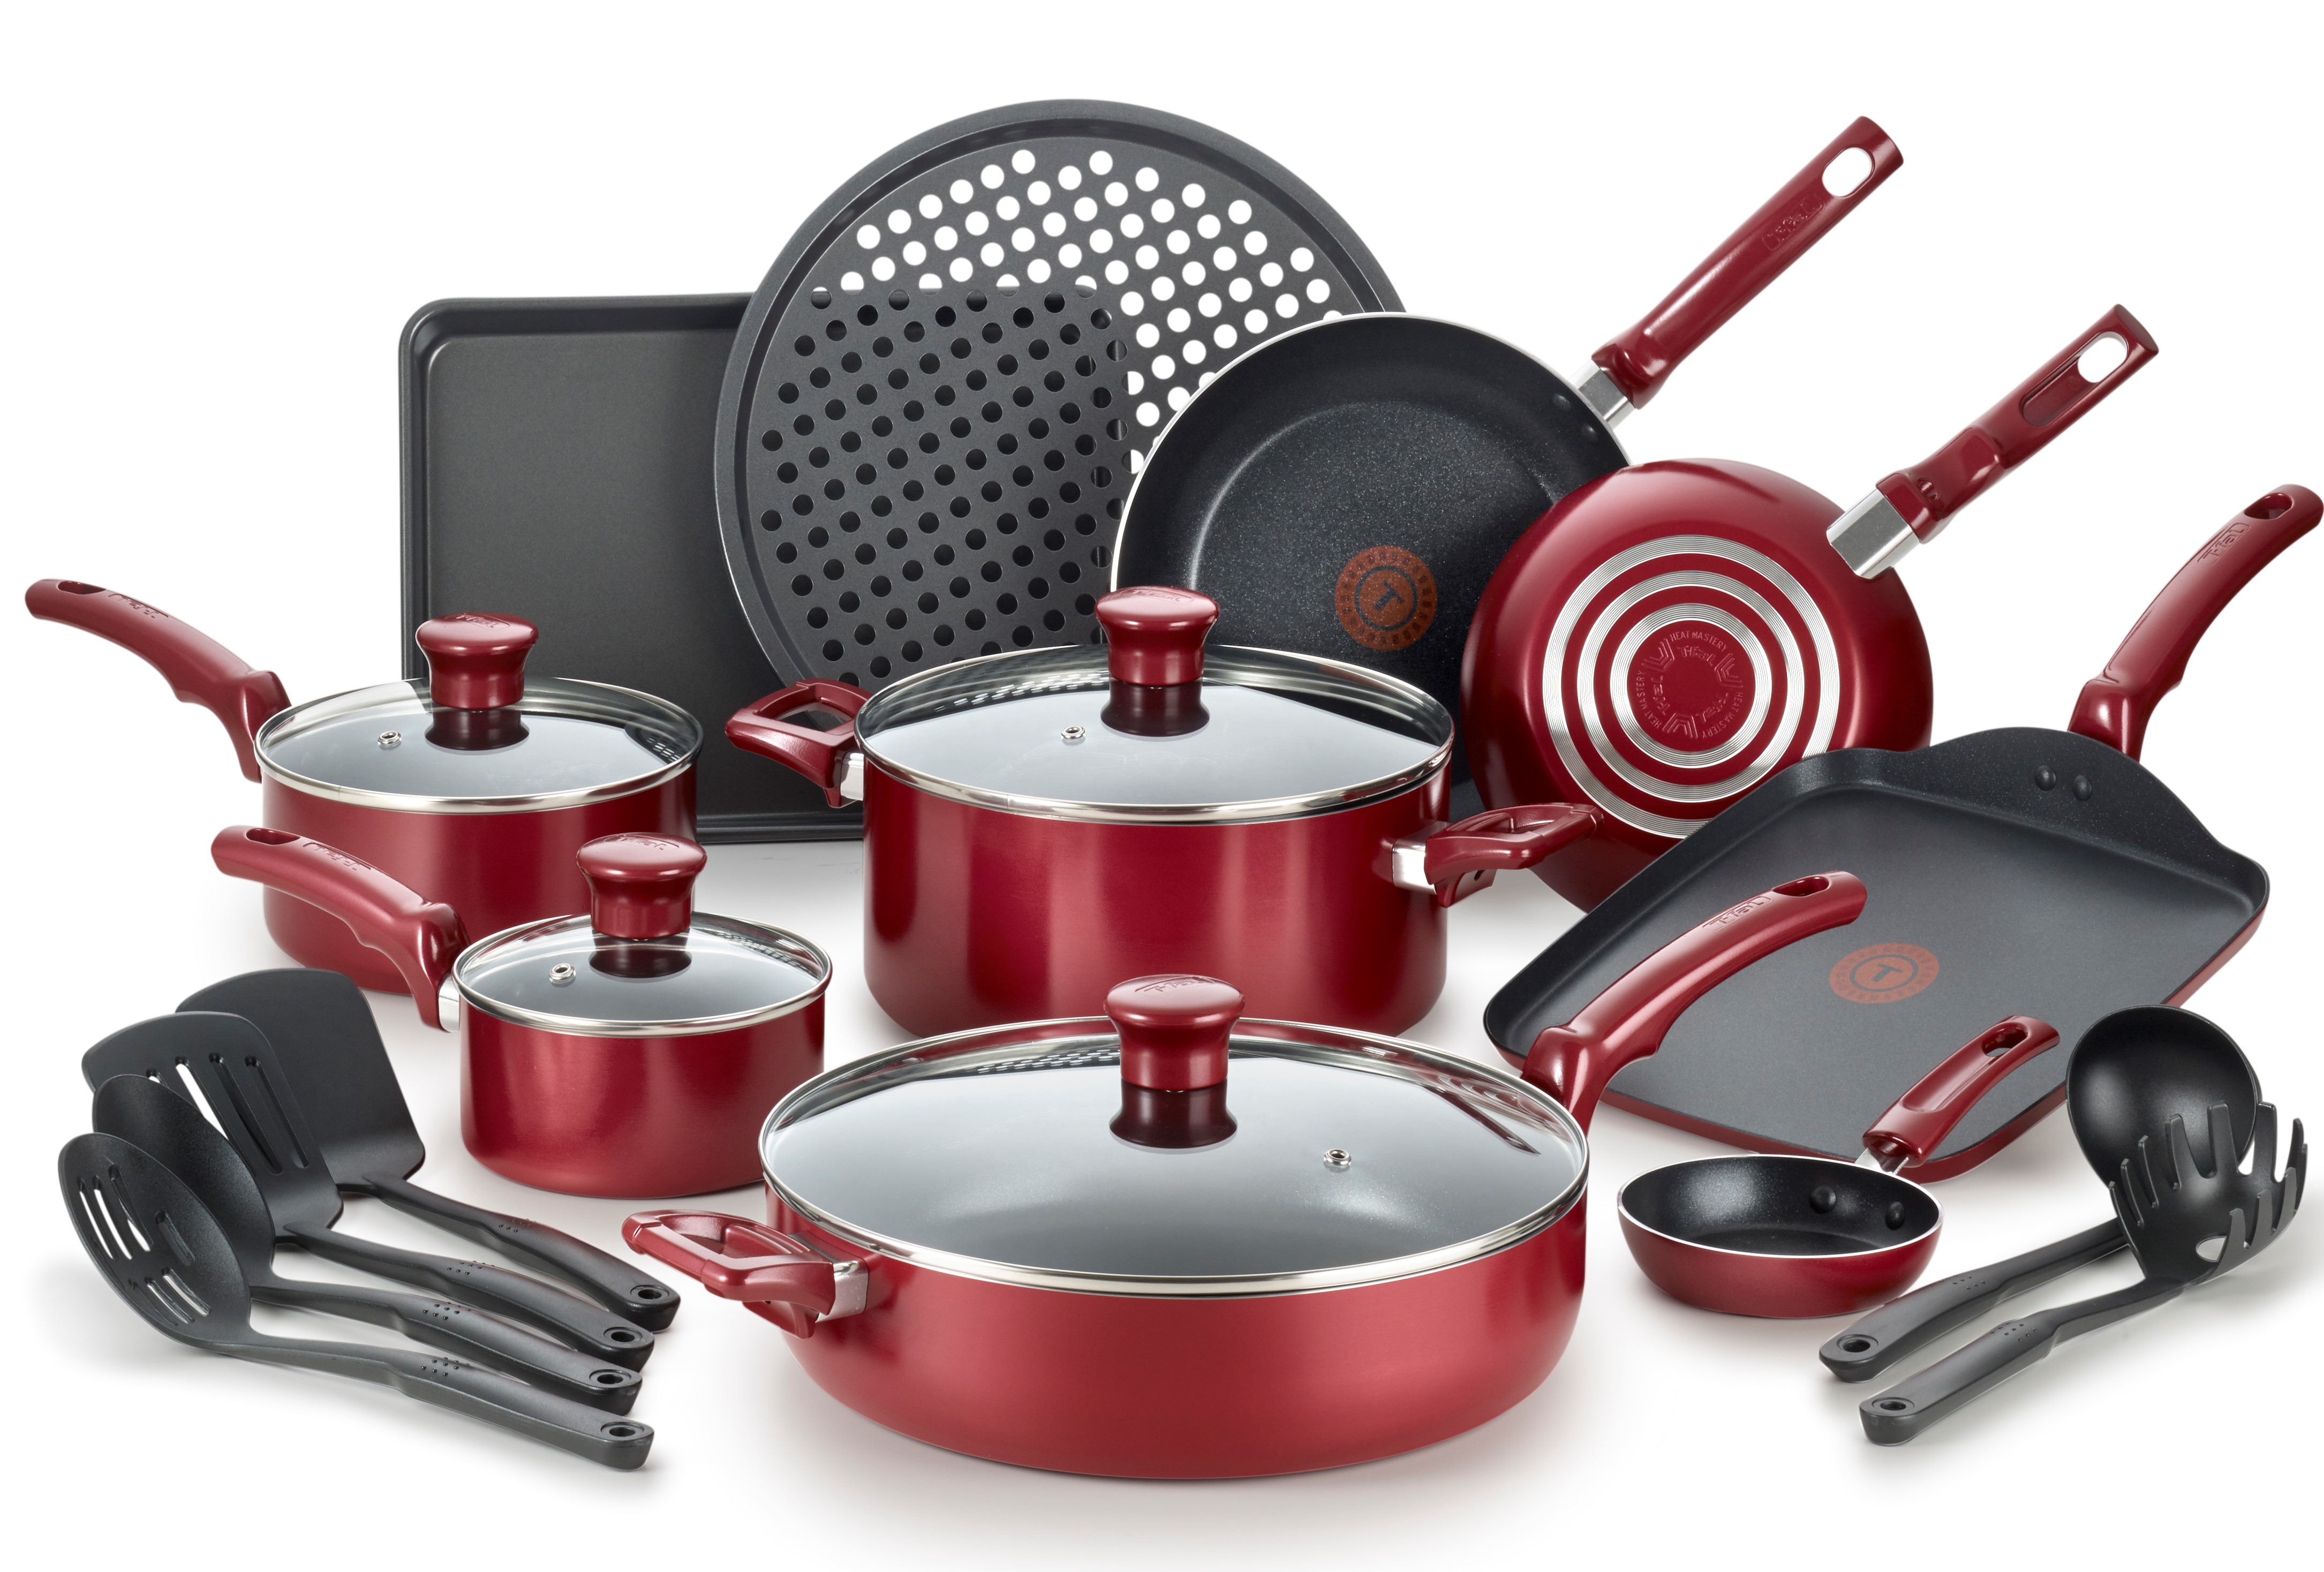 T-fal Kitchen Solutions Cookware Set, Red, 20 Pieces - image 1 of 25